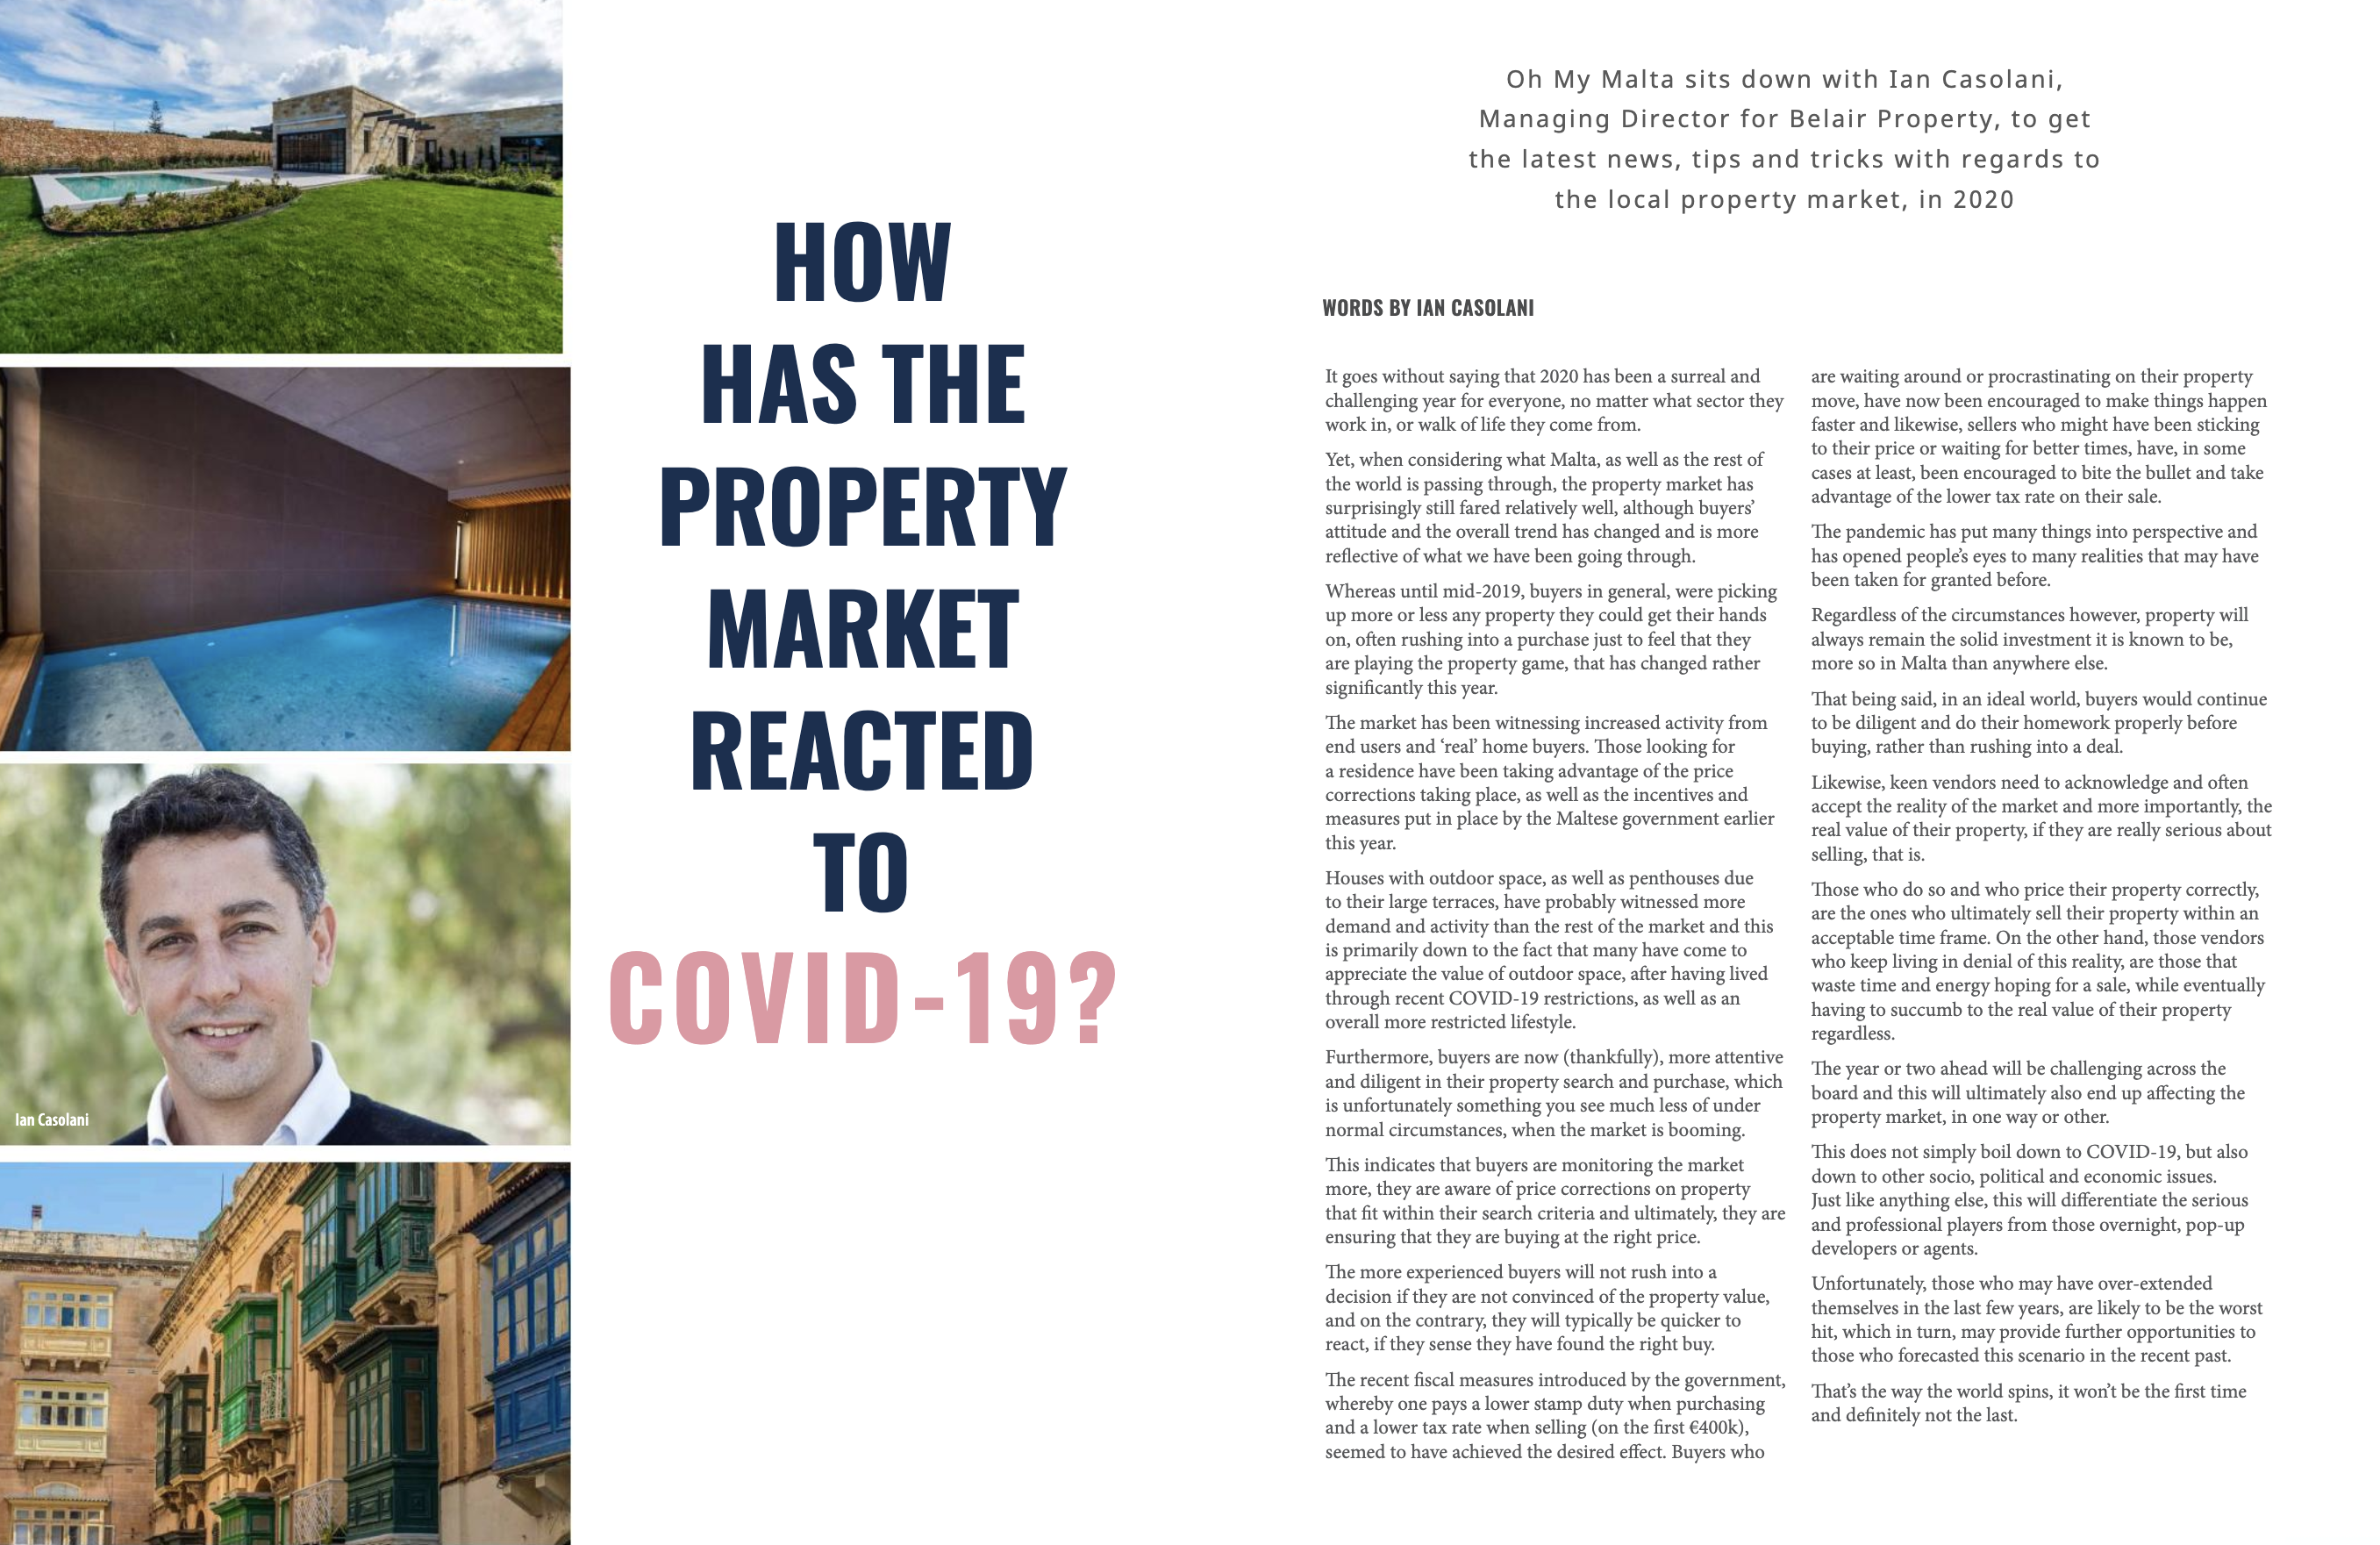 Article about Covid and property market